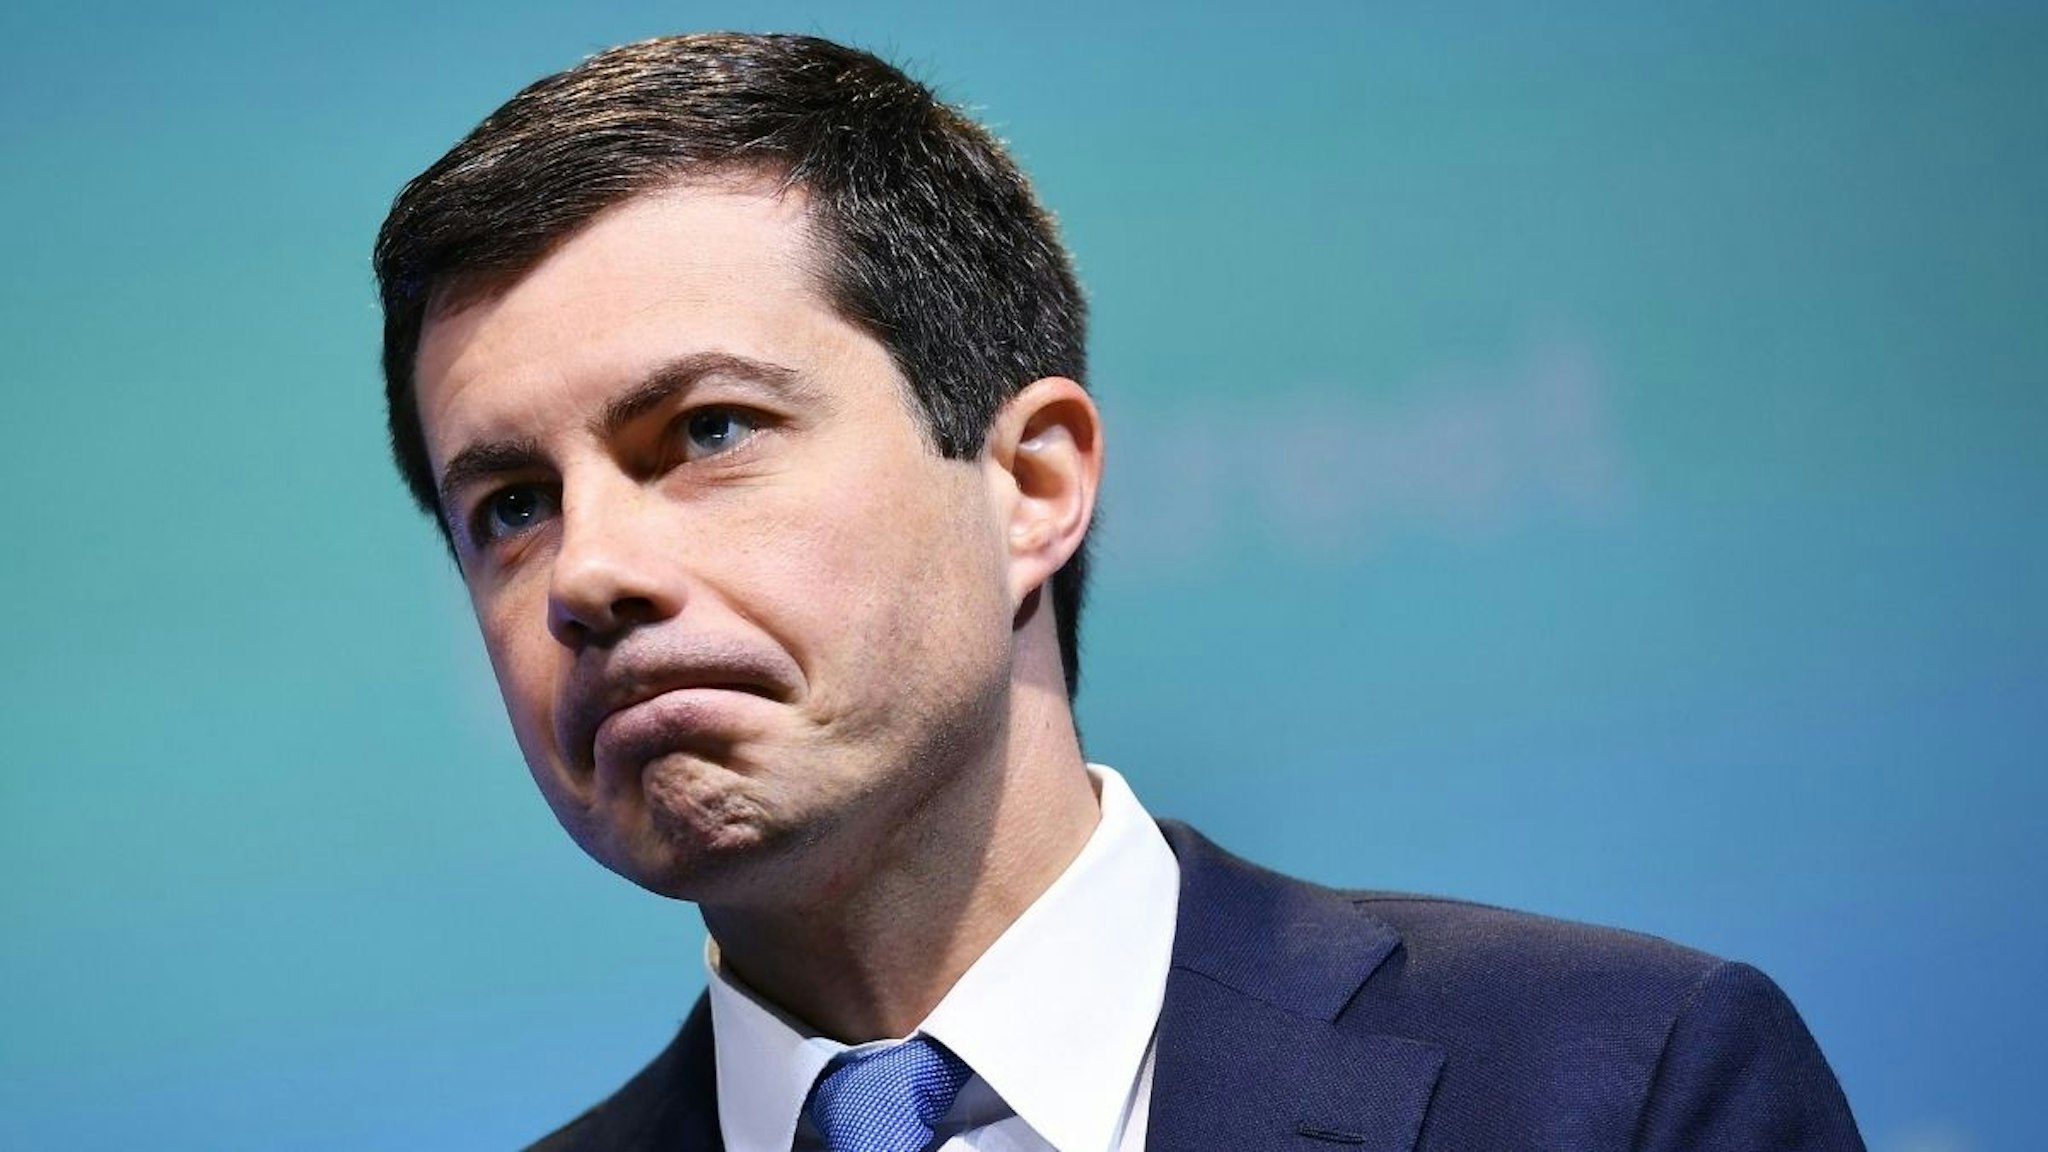 Democratic presidential candidate South Bend, Indiana Mayor Peter Buttigieg speaks during the 2019 J Street National Conference at the Walter E. Washington Convention Center in Washington, DC on October 28, 2019.